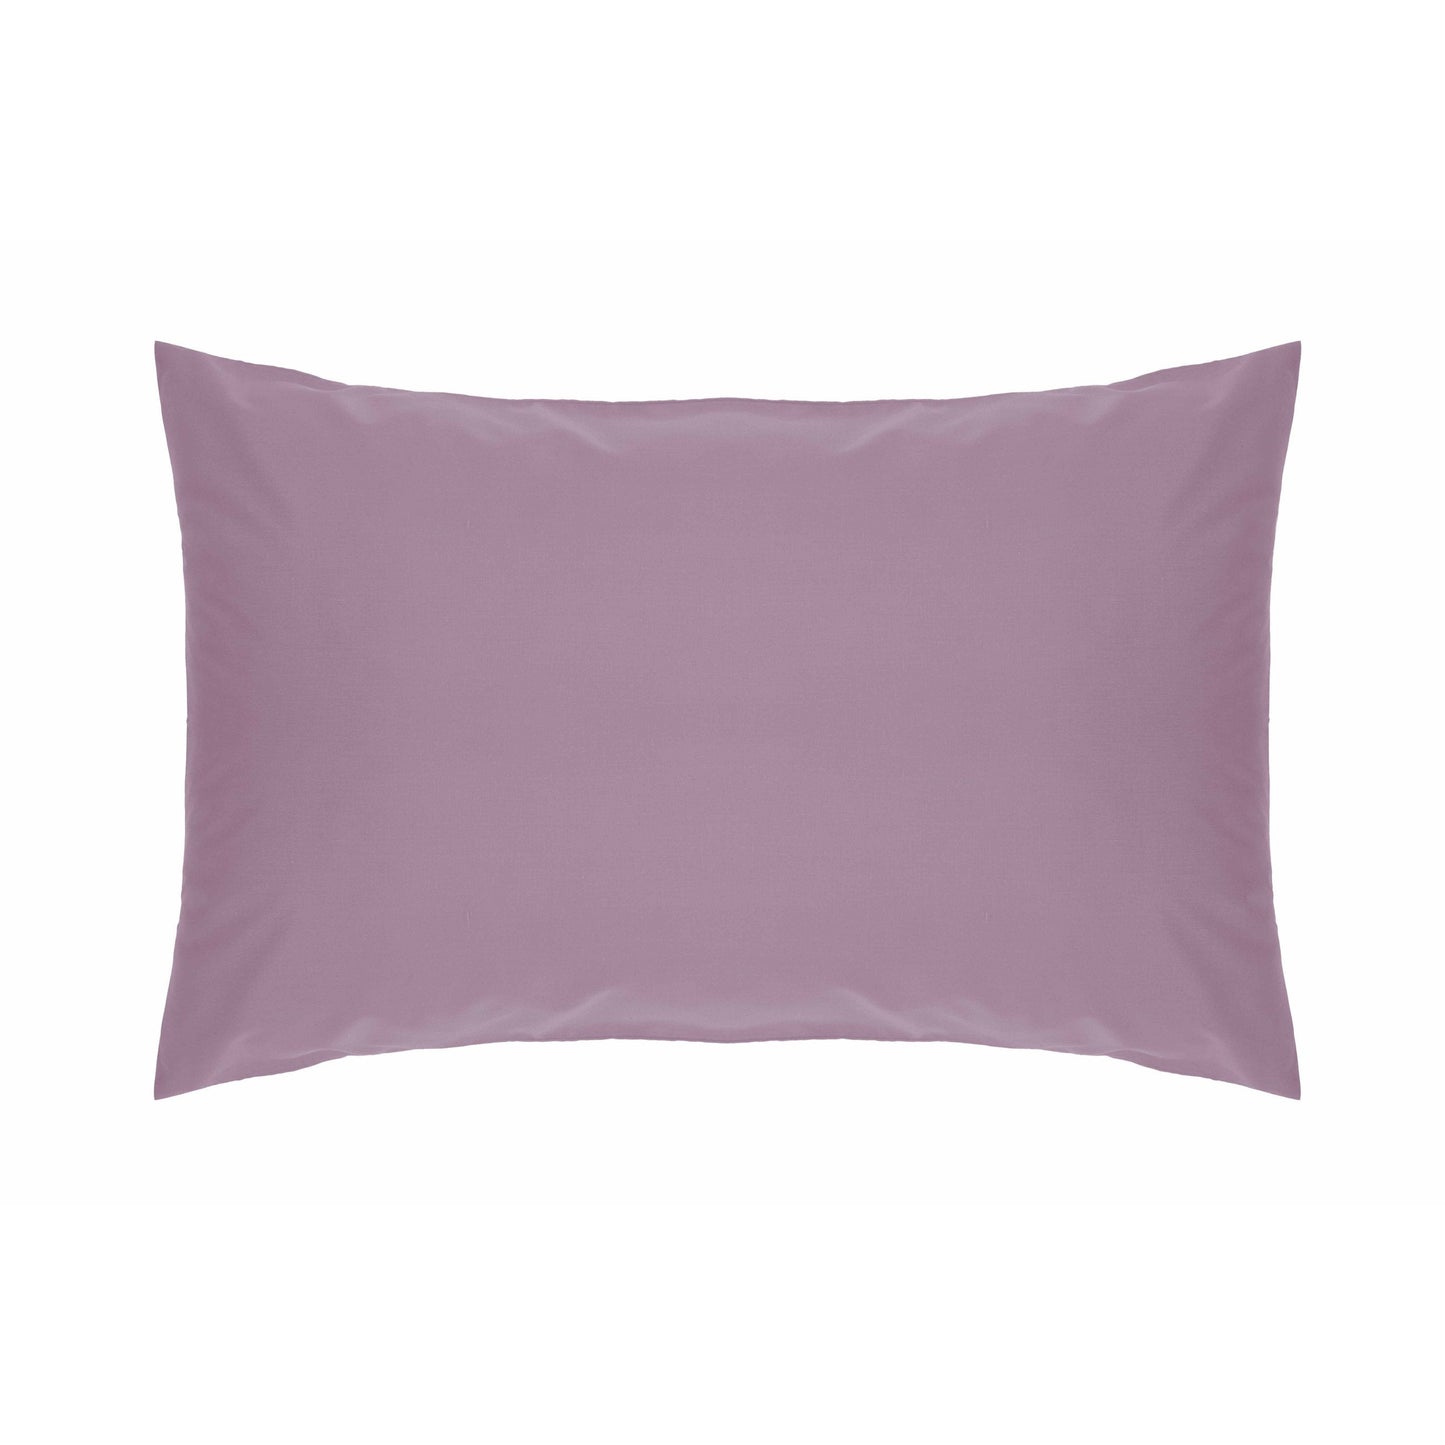 Belledorm-Housewife Pillowcase-Luxury Percale-200 Thread Count-Misty Rose